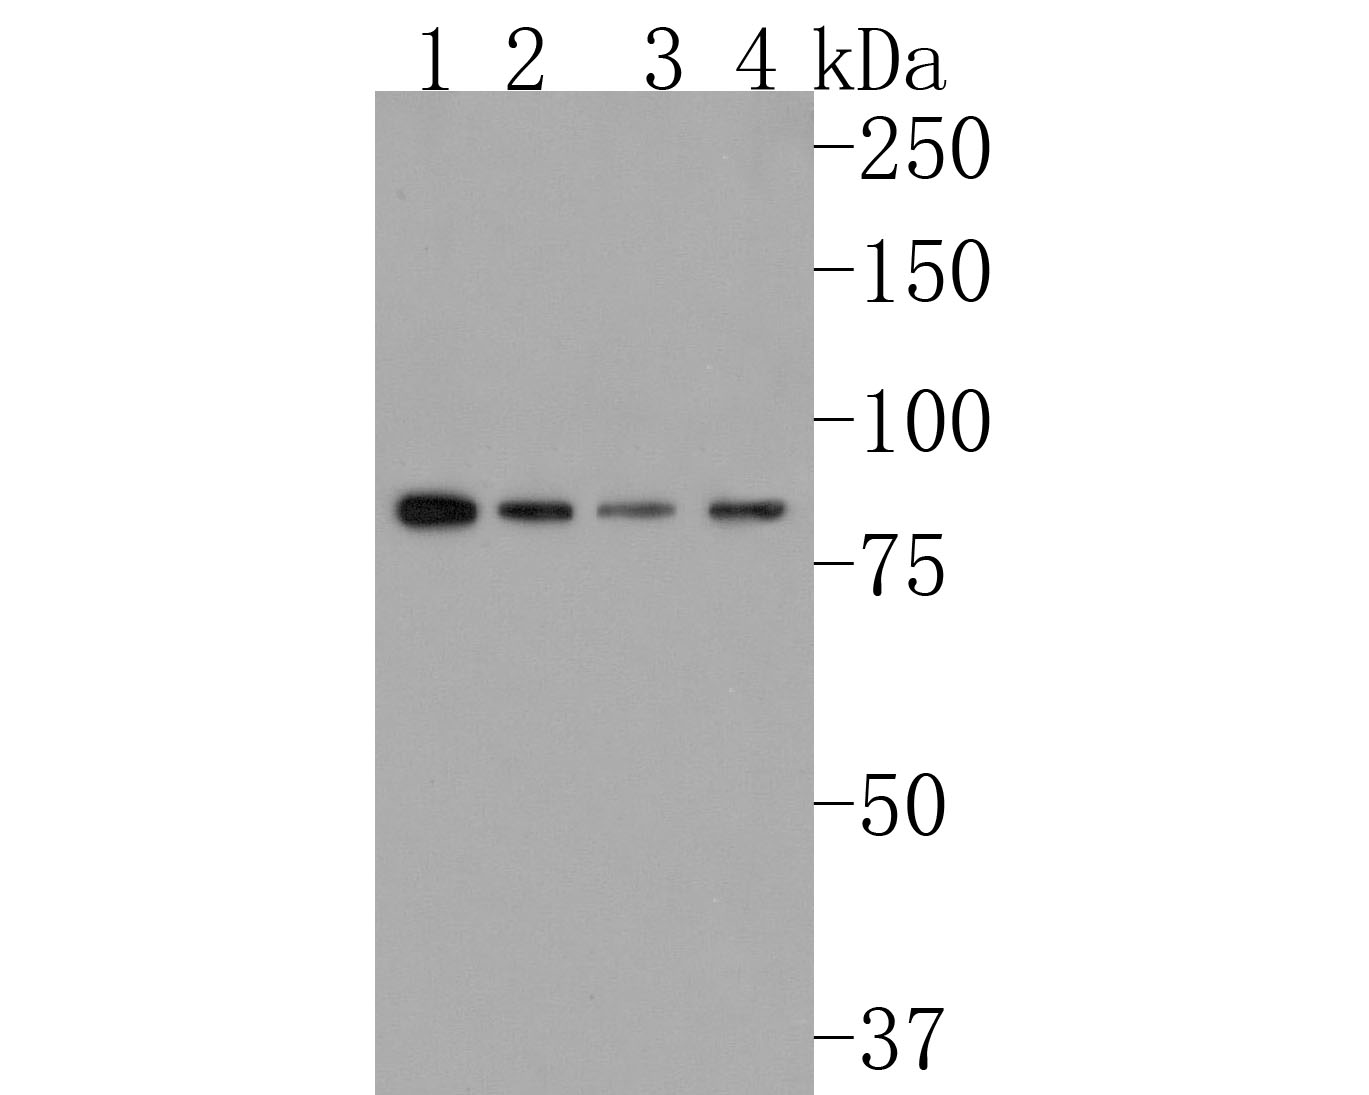 Western blot analysis of HOOK2 on different lysates. Proteins were transferred to a PVDF membrane and blocked with 5% NFDM/TBST for 1 hour at room temperature. The primary antibody (HA720057, 1/500) was used in 5% NFDM/TBST at room temperature for 2 hours. Goat Anti-Rabbit IgG - HRP Secondary Antibody (HA1001) at 1:200,000 dilution was used for 1 hour at room temperature.<br />
Positive control: <br />
Lane 1: Hela cell lysate<br />
Lane 2: 293 cell lysate<br />
Lane 3: HepG2 cell lysate<br />
Lane 4: Rat brain tissue lysate